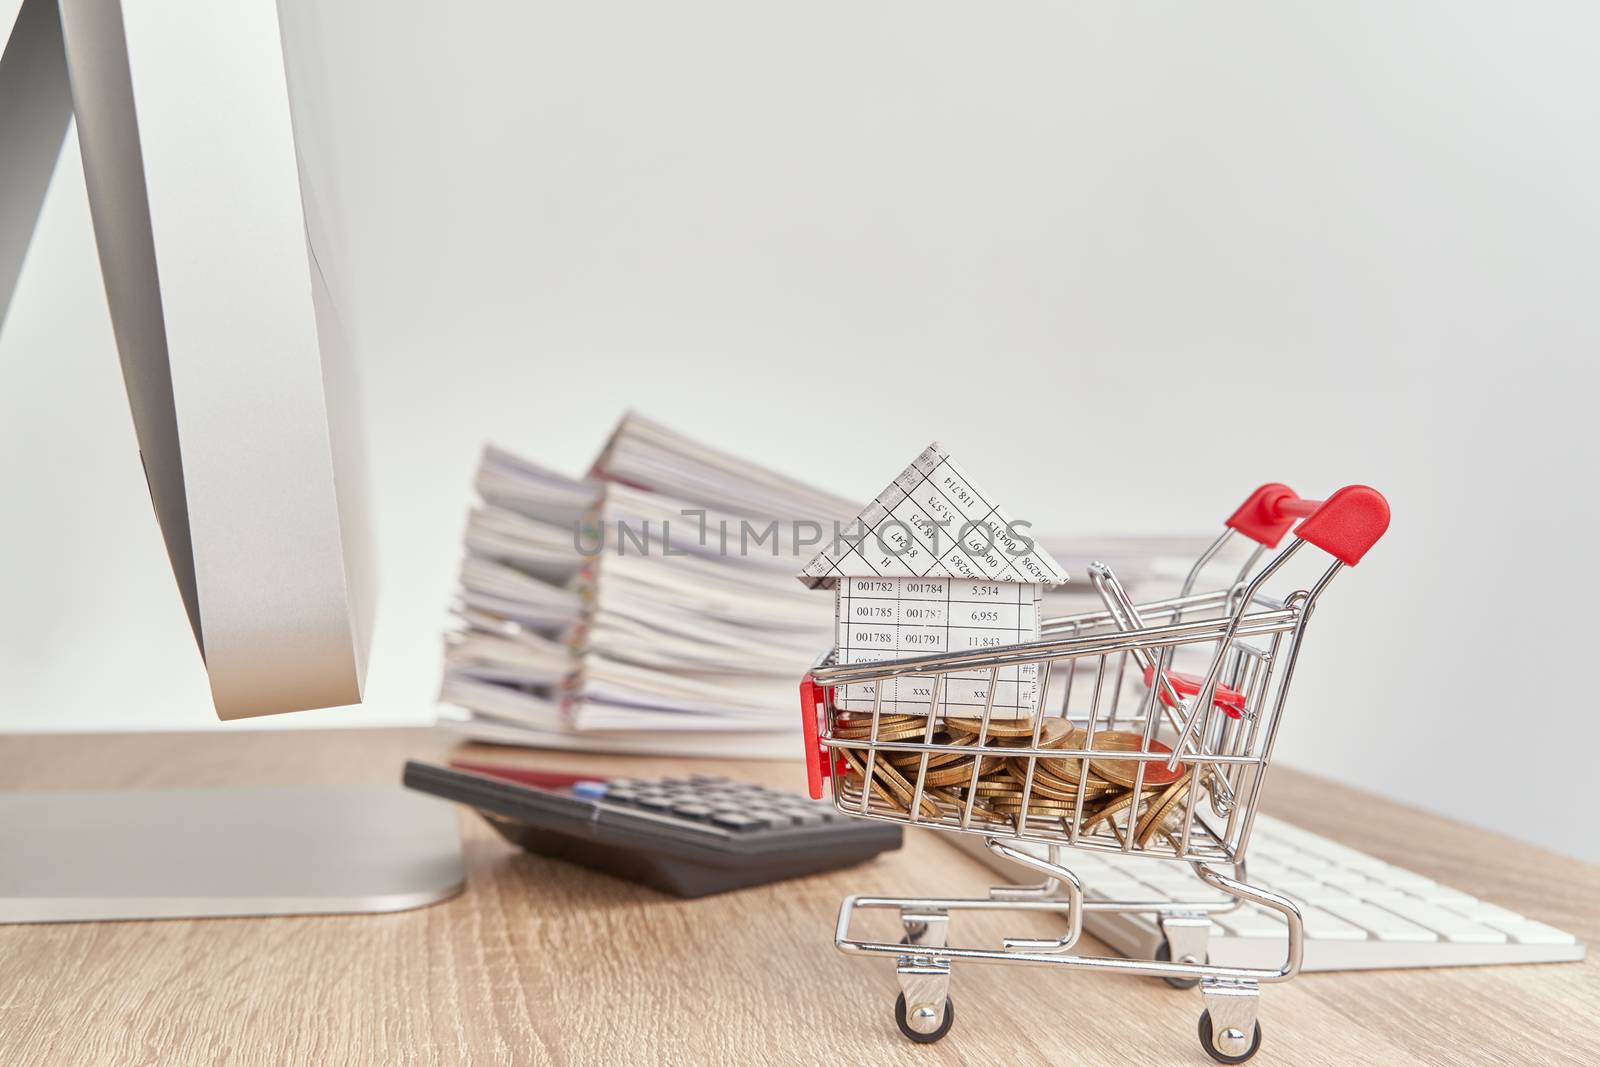 House on gold coins in shopping cart have blur calculator with pencil and pile report of sale on wooden computer table with white background and copy space. Business concepts shopping online.